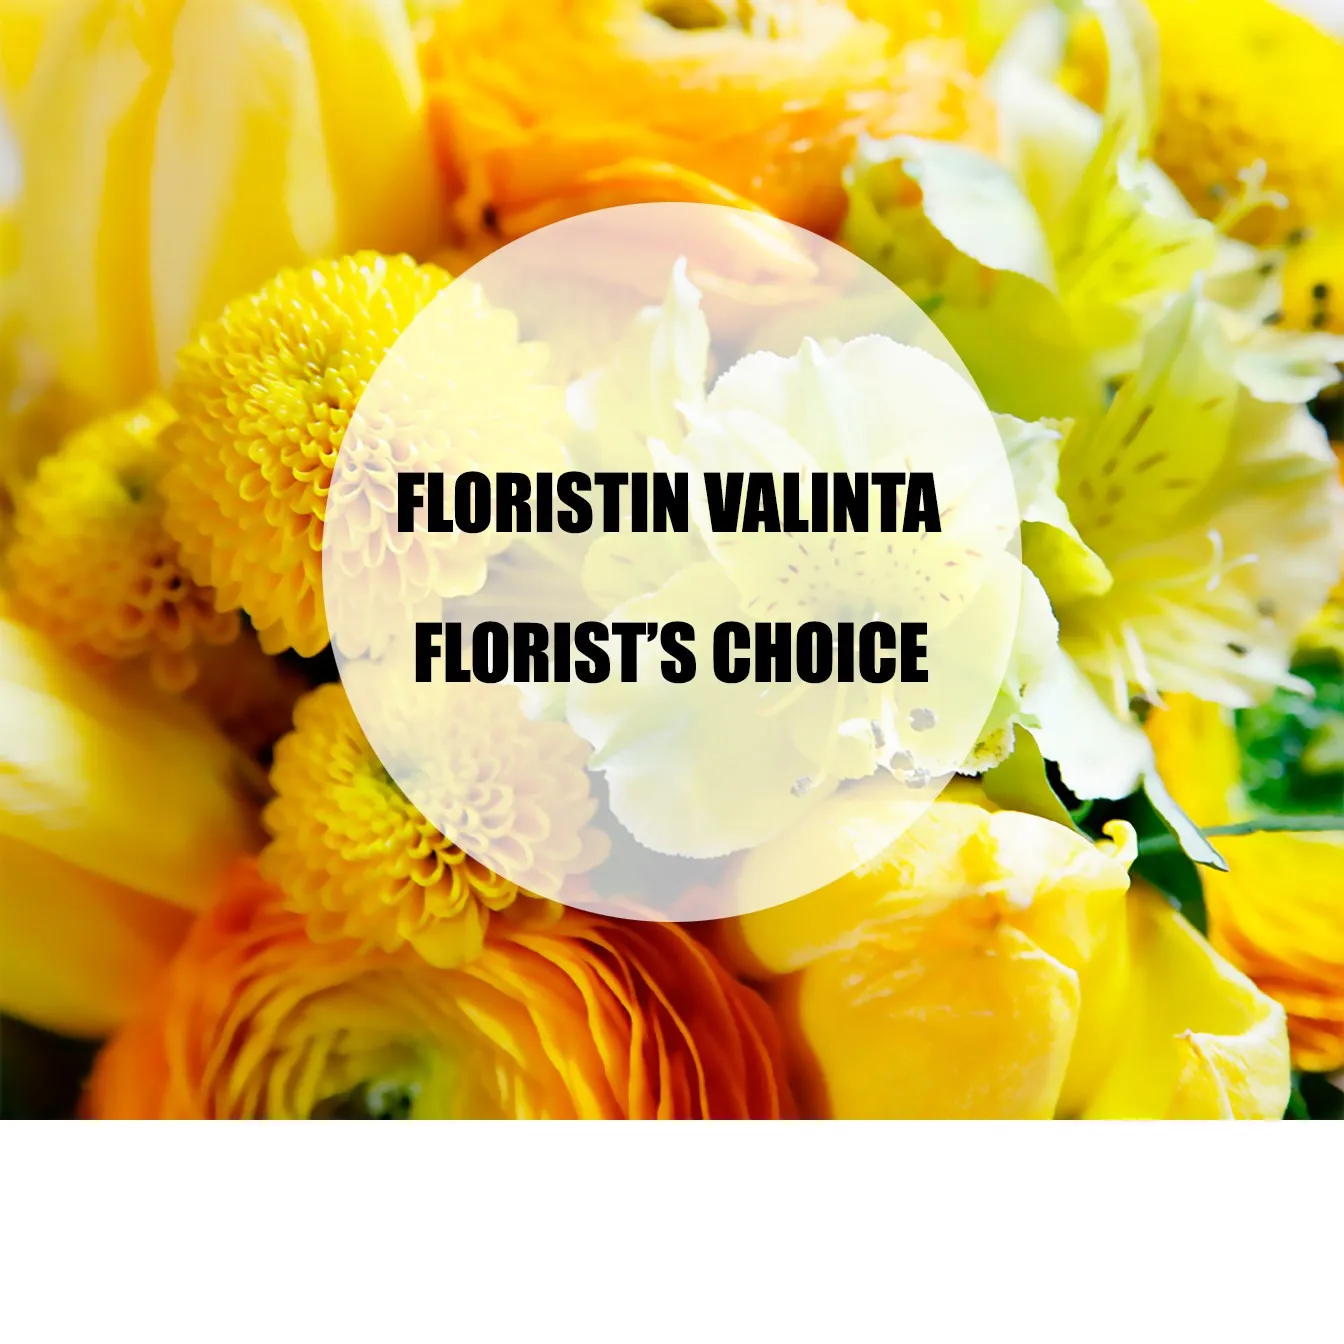 Florist's Choice in yellow - Finland